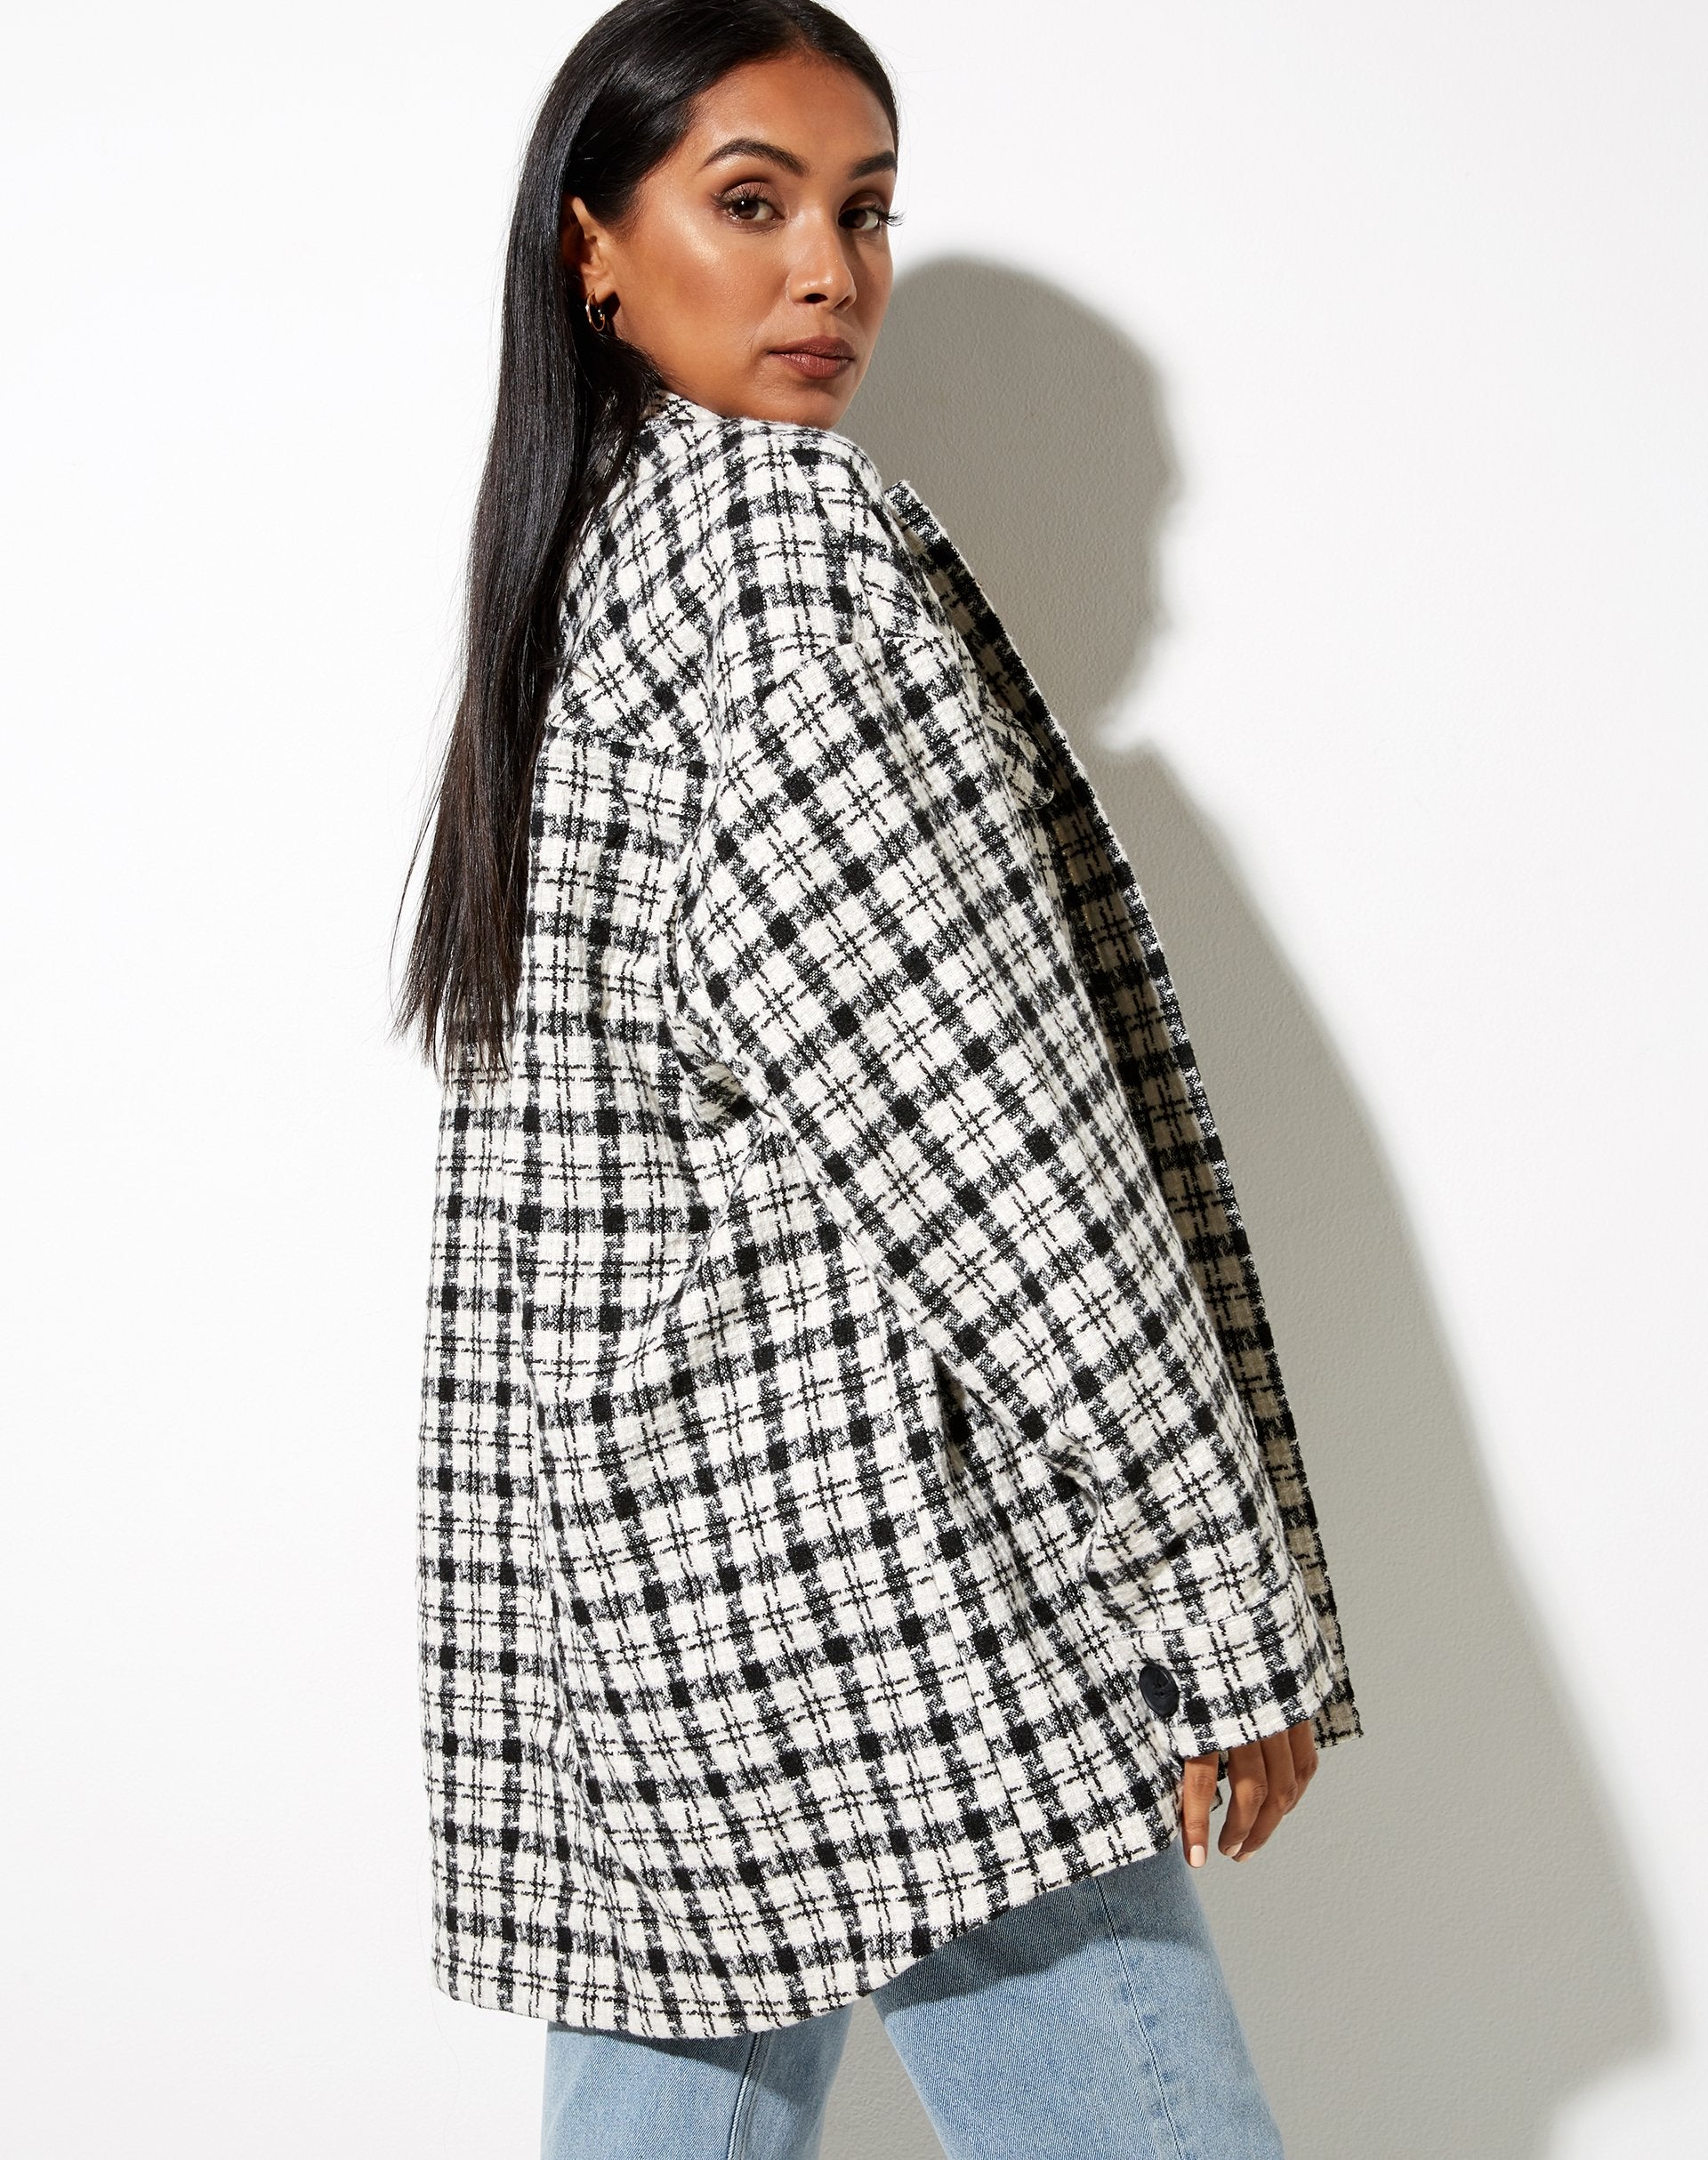 Image of Marcella Shirt in Black and White Check